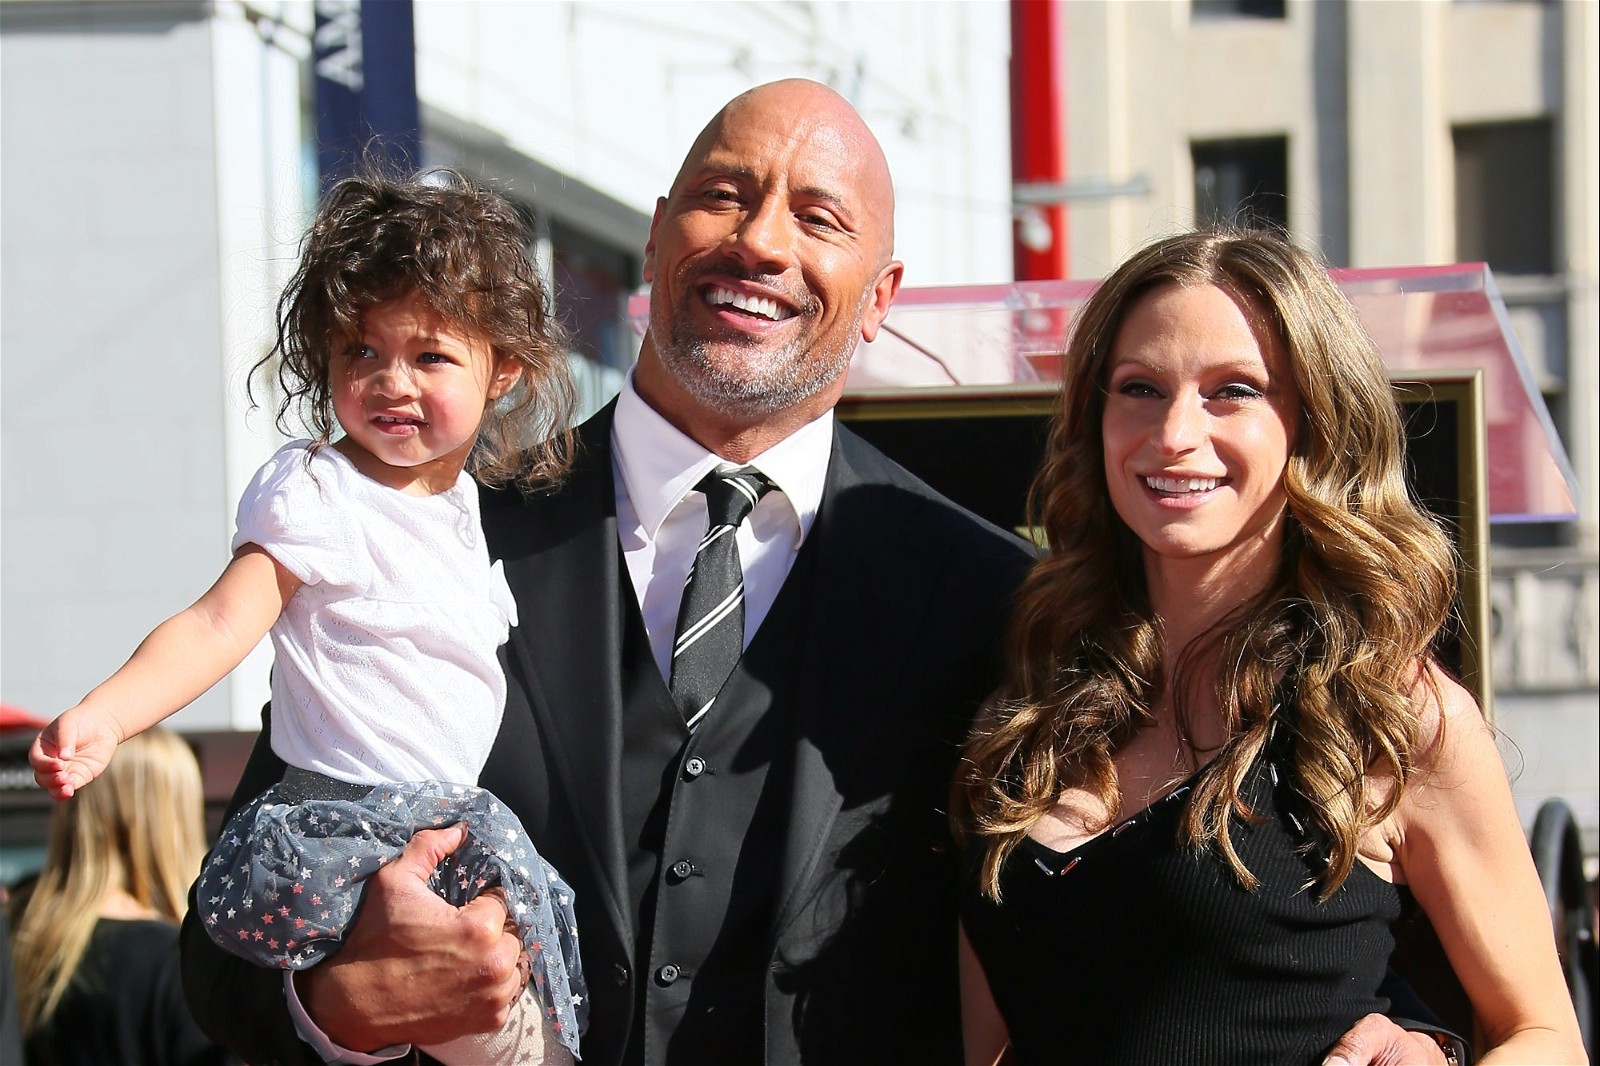 Dwayne Johnson with his daughter and Wife